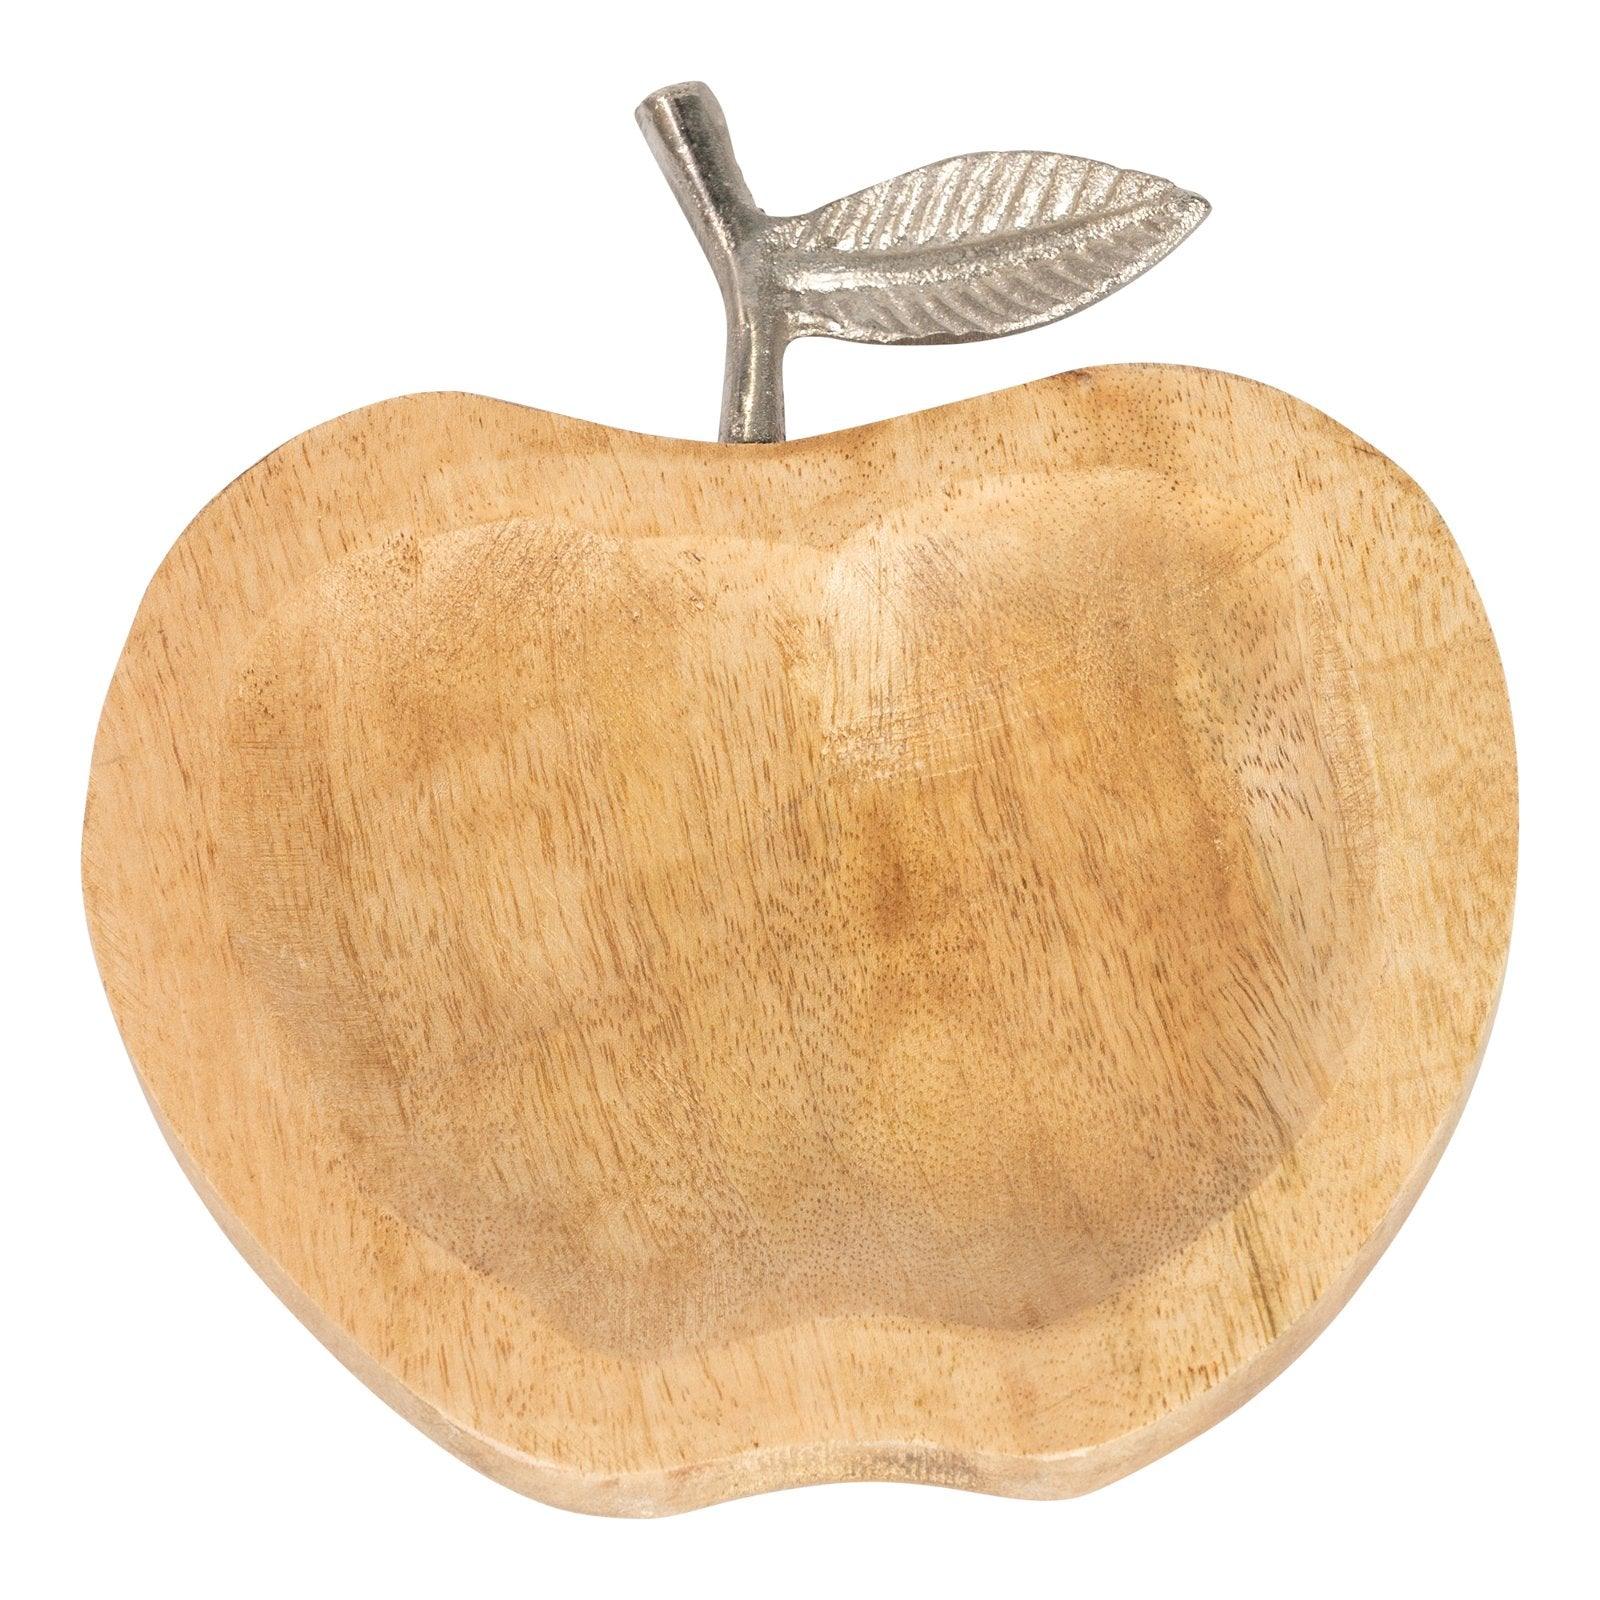 Wooden Apple Designed Tray with Silver Leaf - Large - £20.99 - Trays & Chopping Boards 